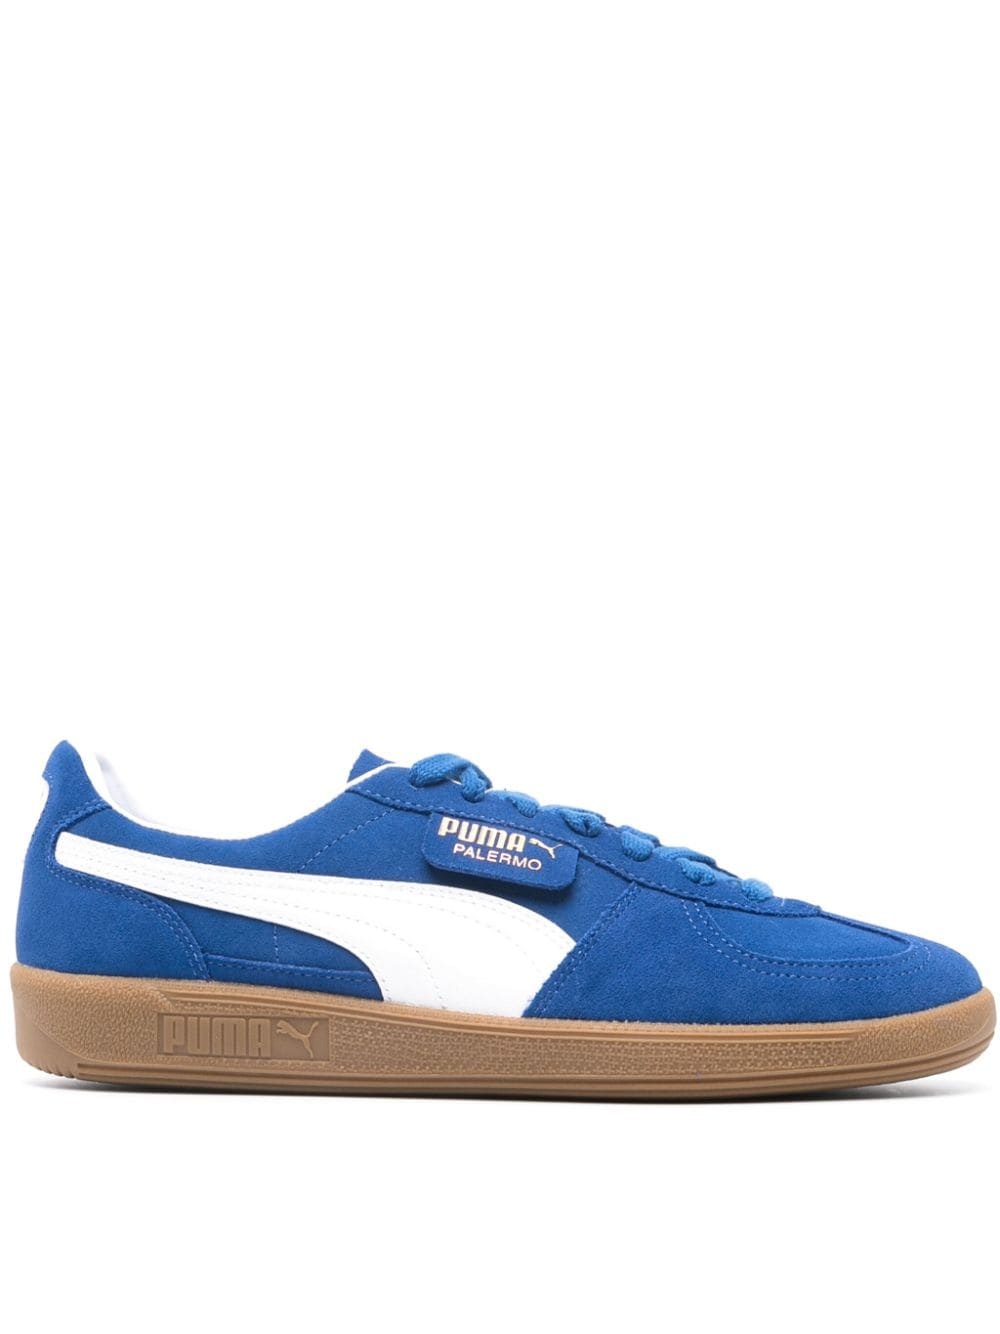 Palermo suede sneakers - 1